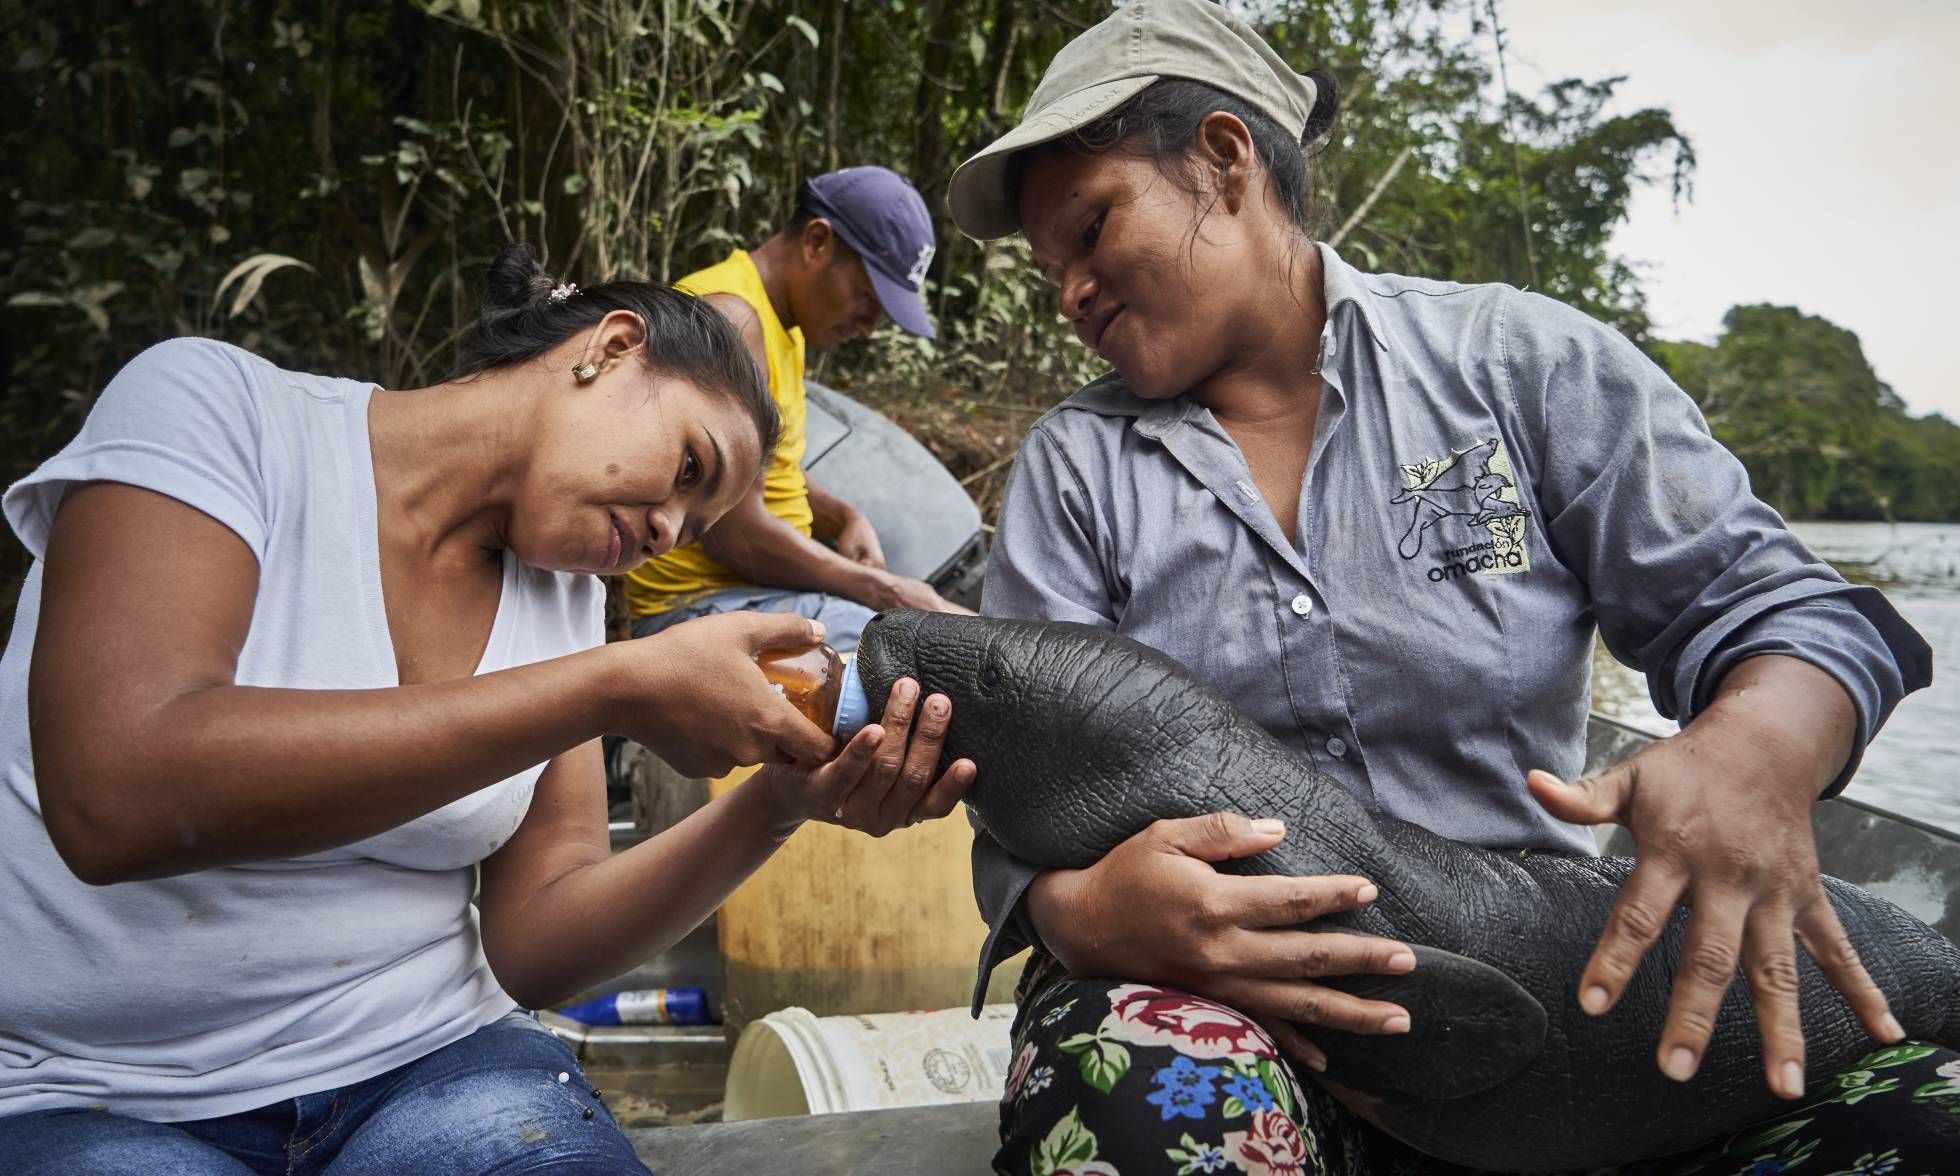 Two women, Lilia and Karina, feed a manatee that they found stranded on the bank of the Amazon River. The woman on the left feeds the manatee by hand while the women on the right holds the manatee in her lap.